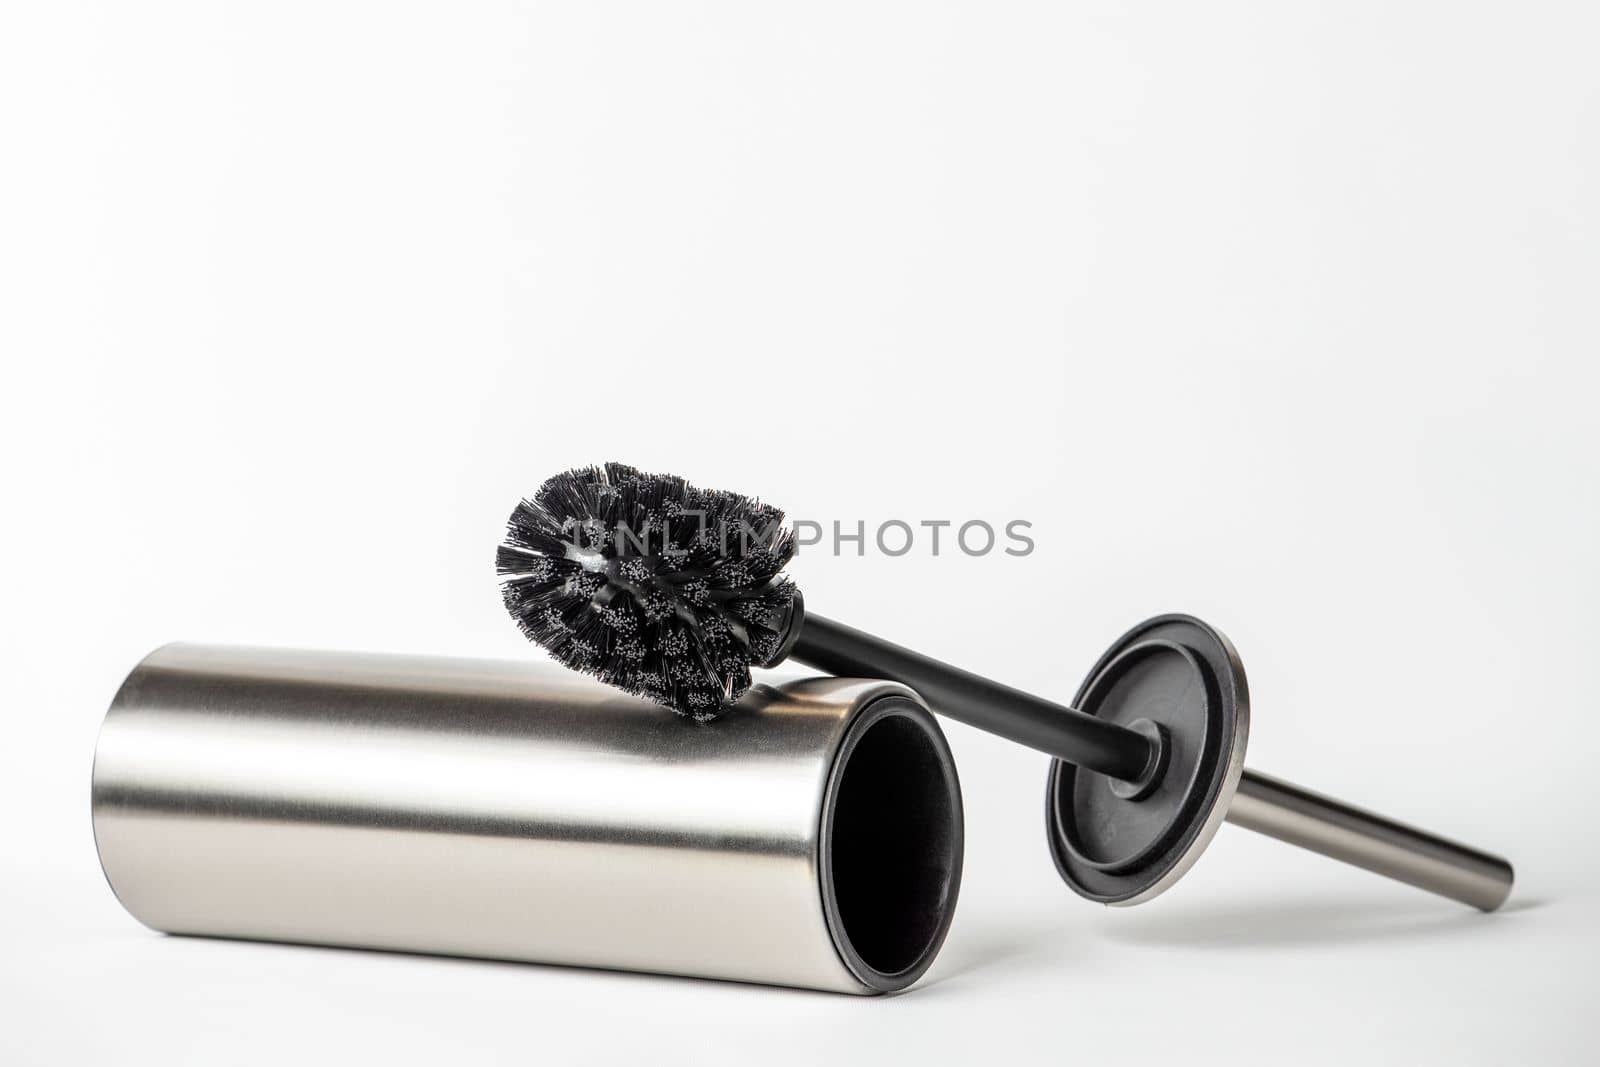 Black toilet brush isolated on white. Close-up of a toilet cleaning brush with metal elements to insert into a project or design. Metal brush for the toilet on a white background